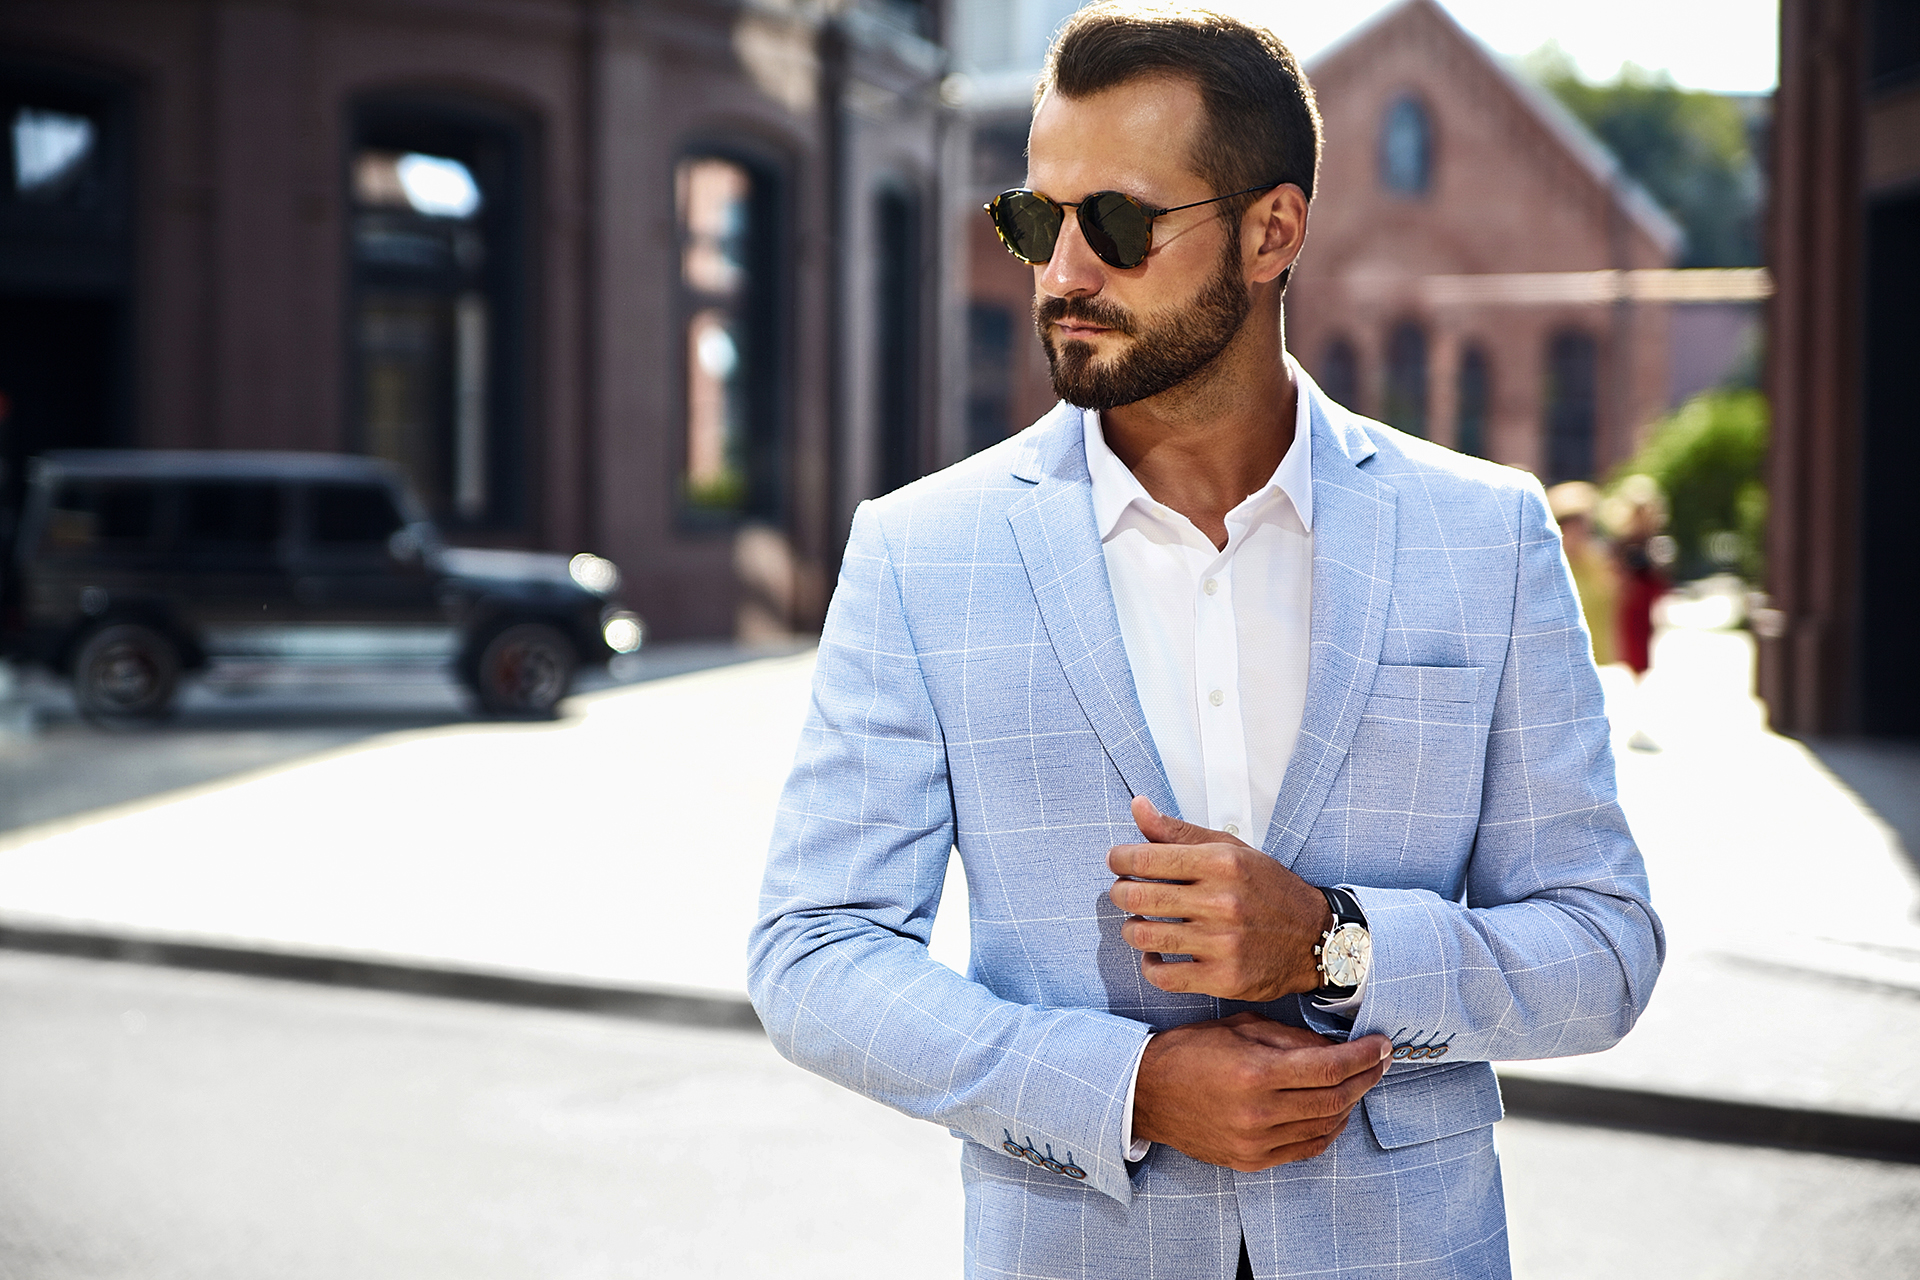 What are the best formal outfit ideas for men in 2019? - Quora